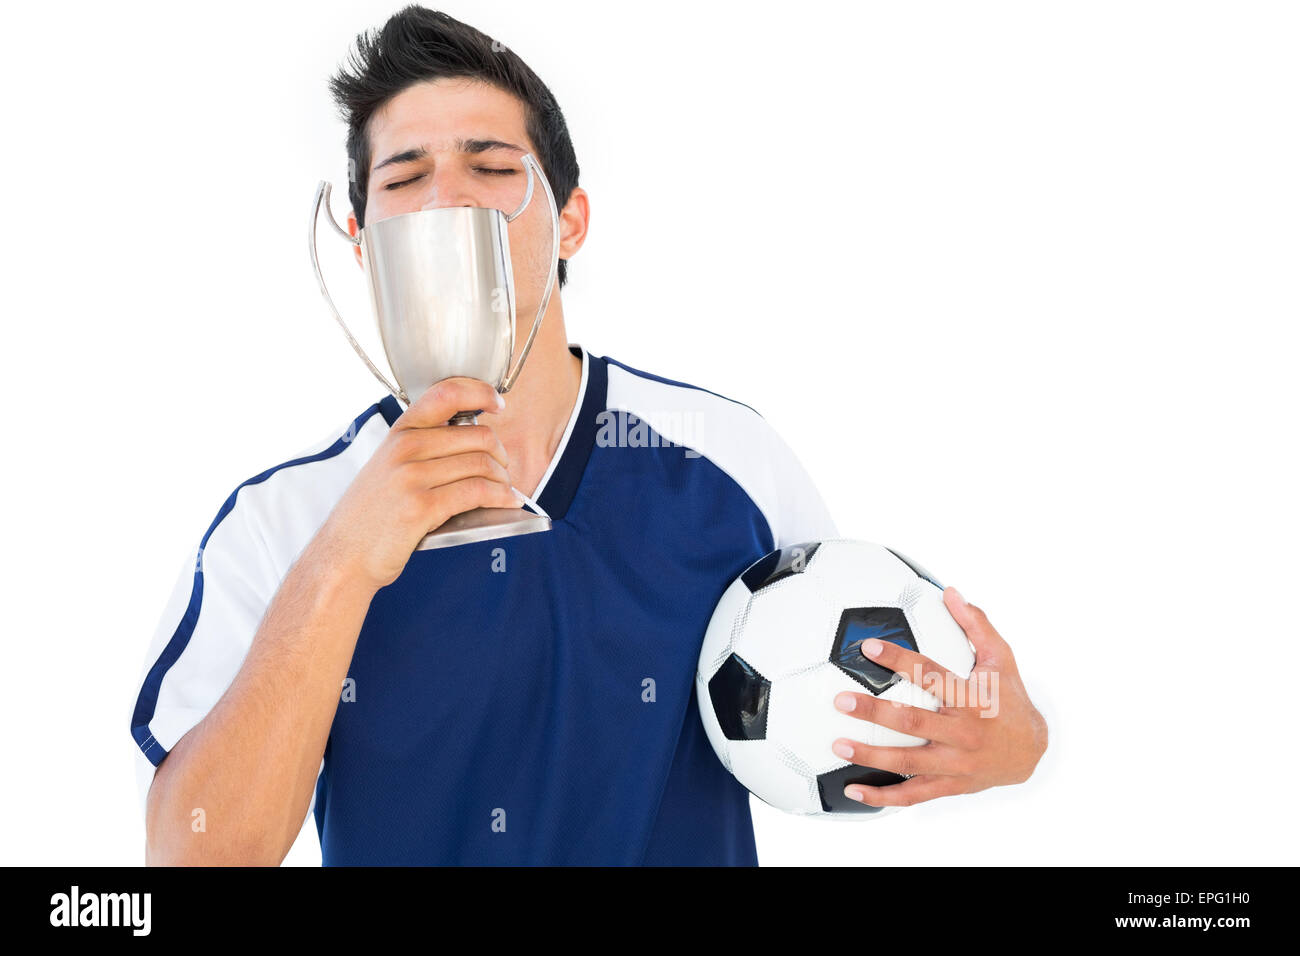 Football player in blue holding winners cup and ball Stock Photo